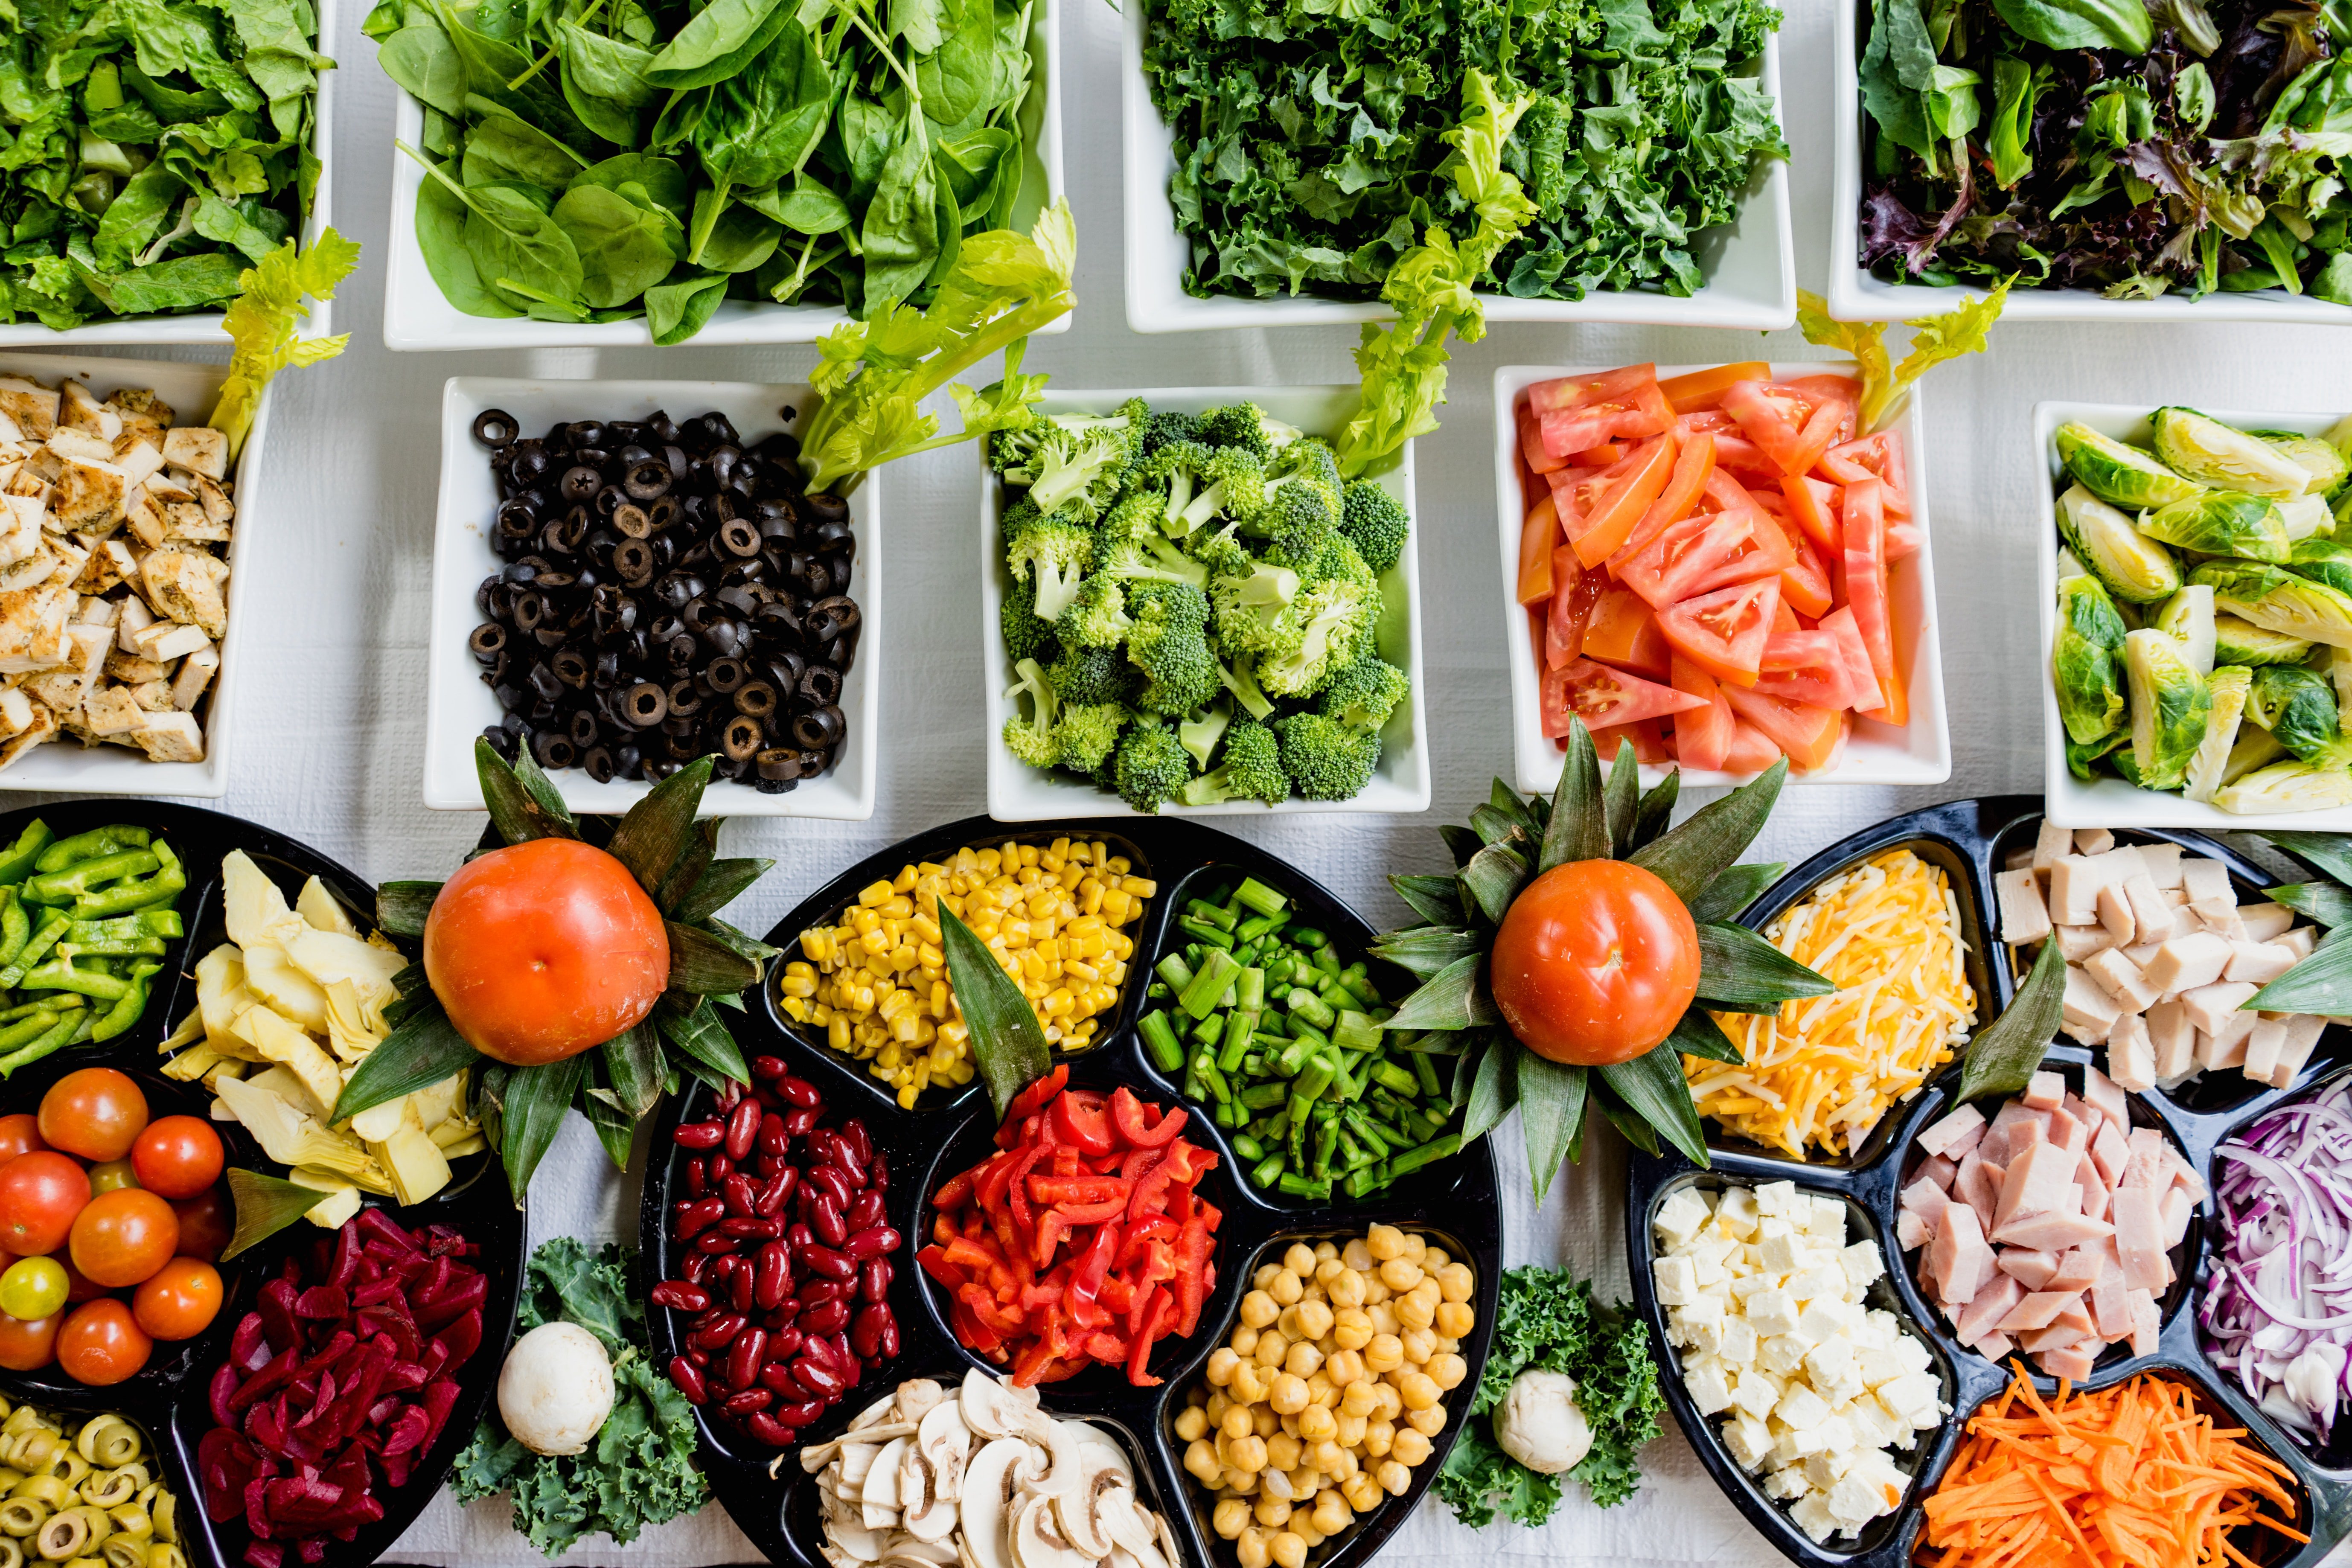 EatWell prescribes meal kits to prevent chronic diseases